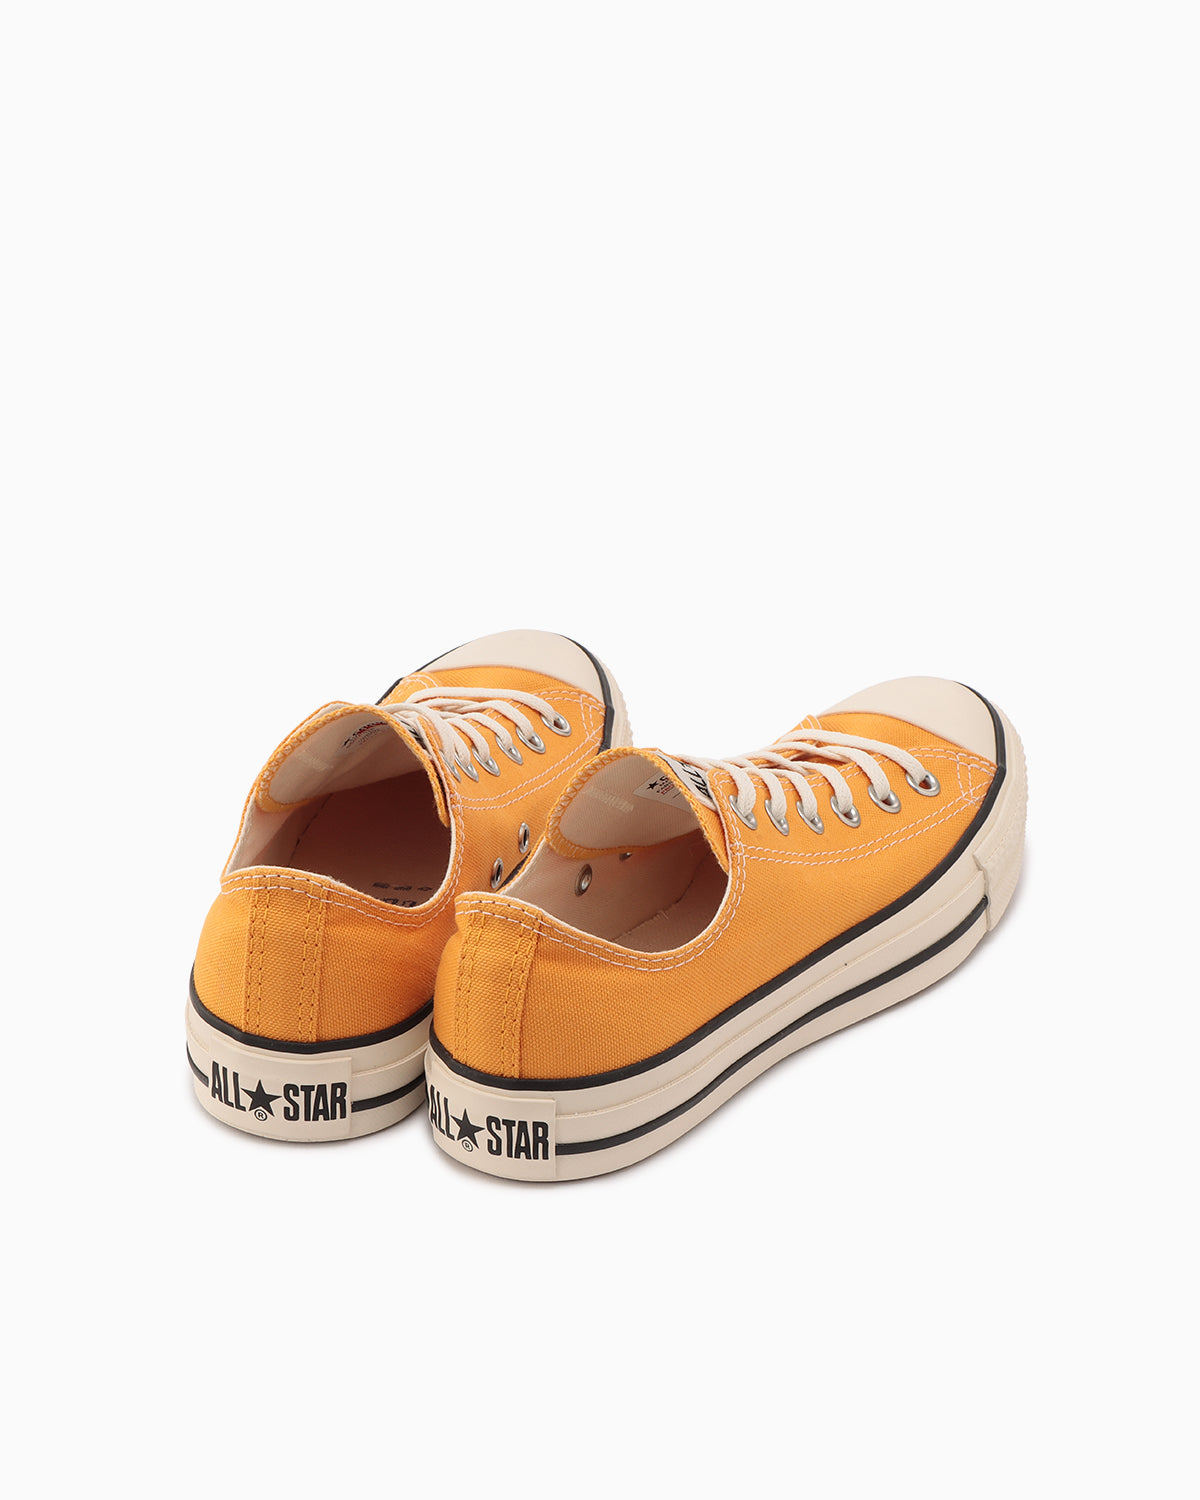 ALL STAR BURNT COLORS OX